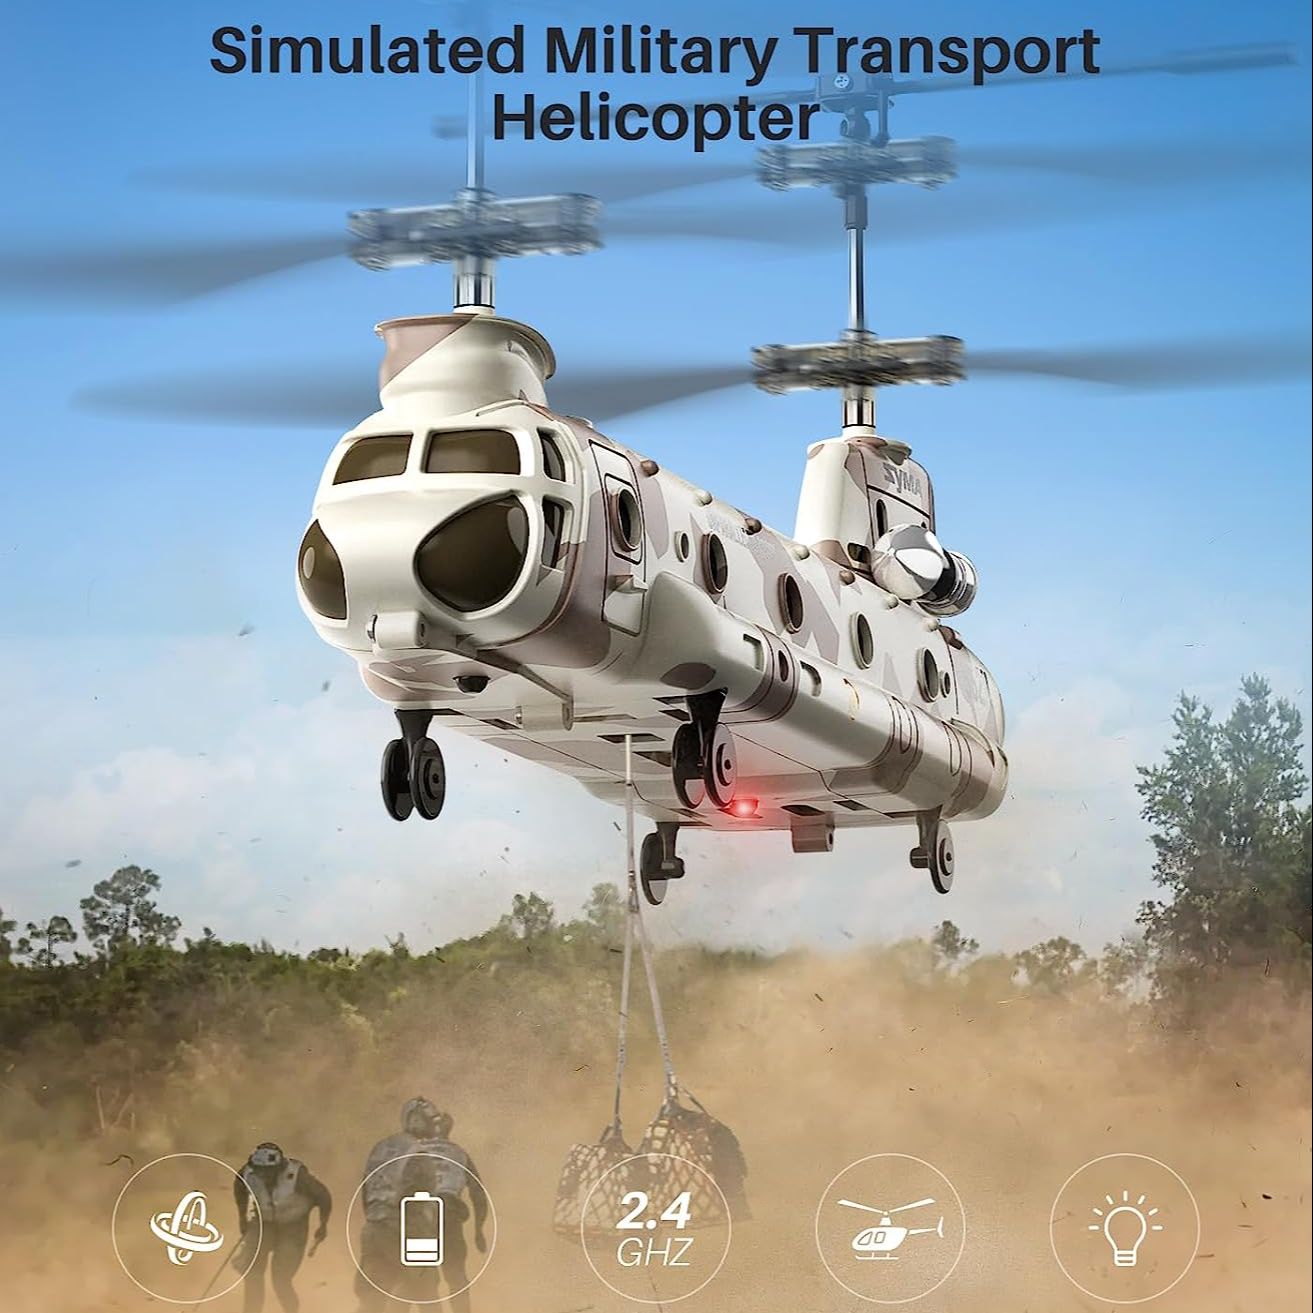 Simulated Military Transport Helicopter 2.4 GH